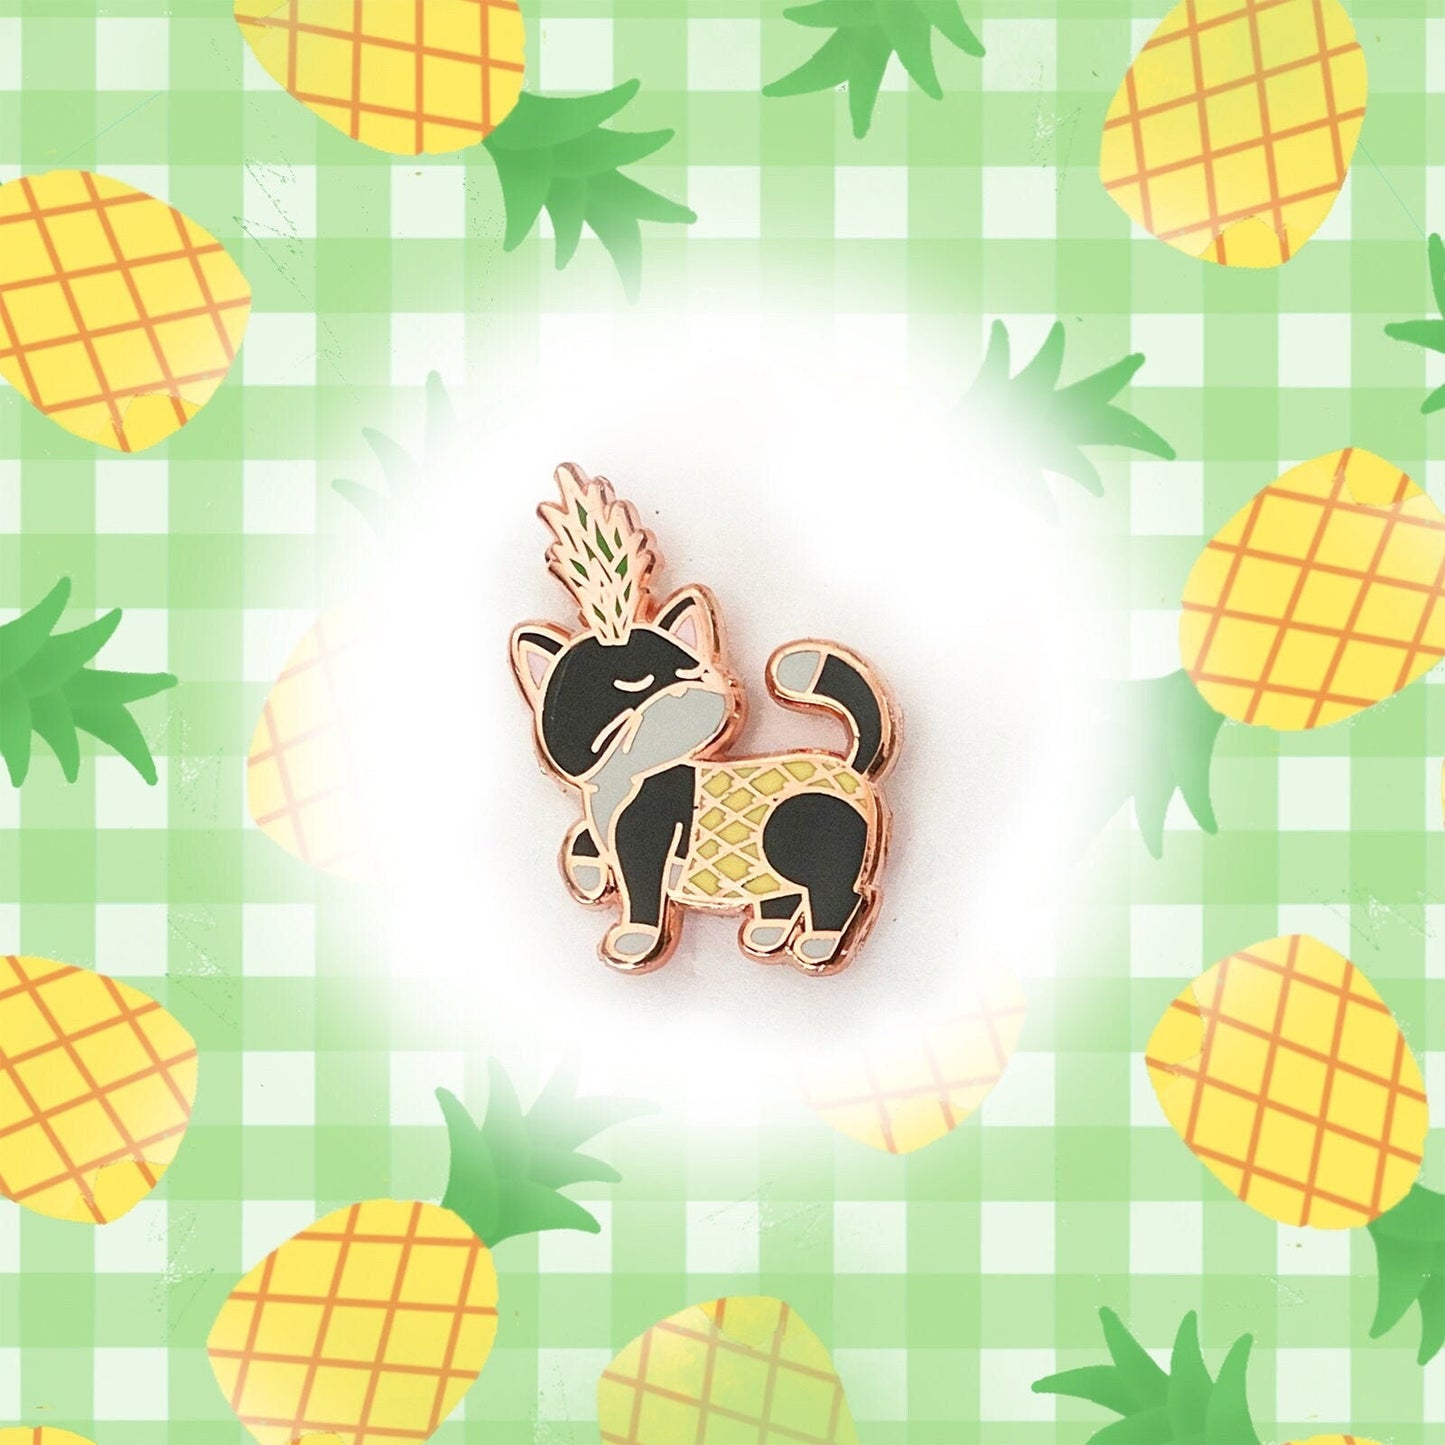 Fruit Salad Kitties Mini Collection, Set of 3 (Banana, Pineapple, Strawberry) - Small 1&quot; Enamel Pins, Pins, Brooches & Lapel Pins